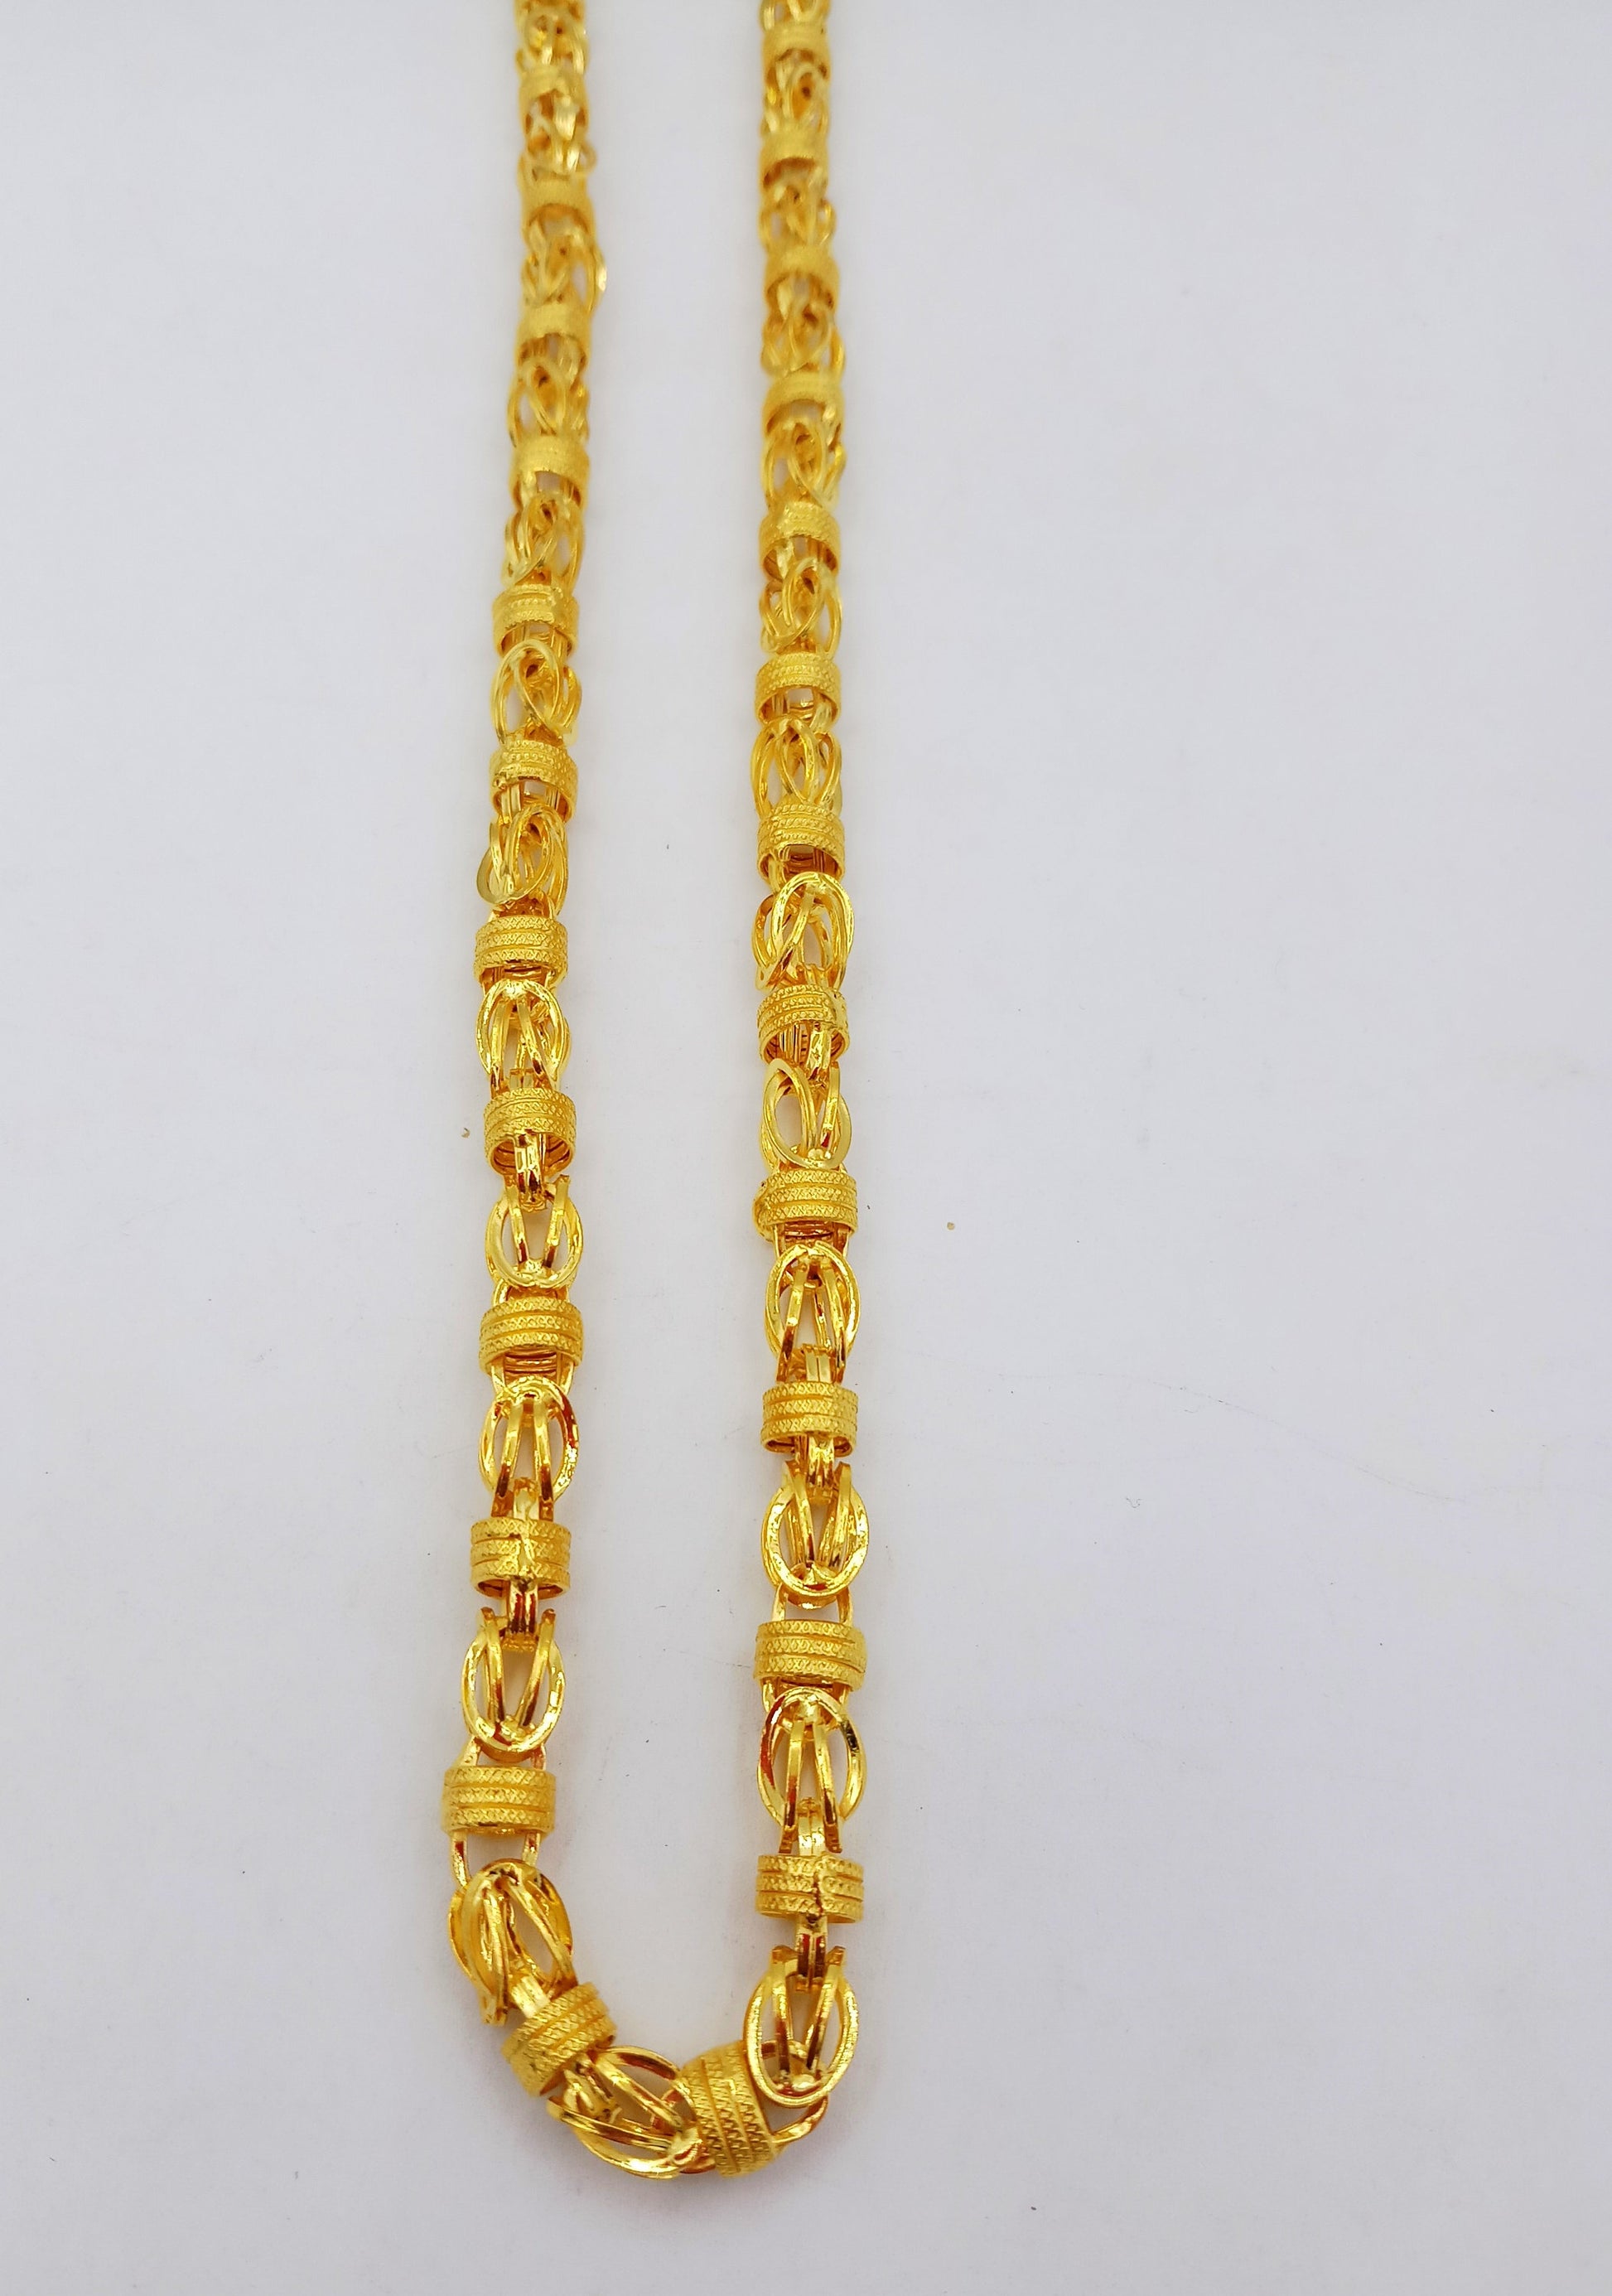 22karat yellow gold handmade 20 inches long amazing byzantine chain necklace certified india jewelry for unisex gifting - TRIBAL ORNAMENTS